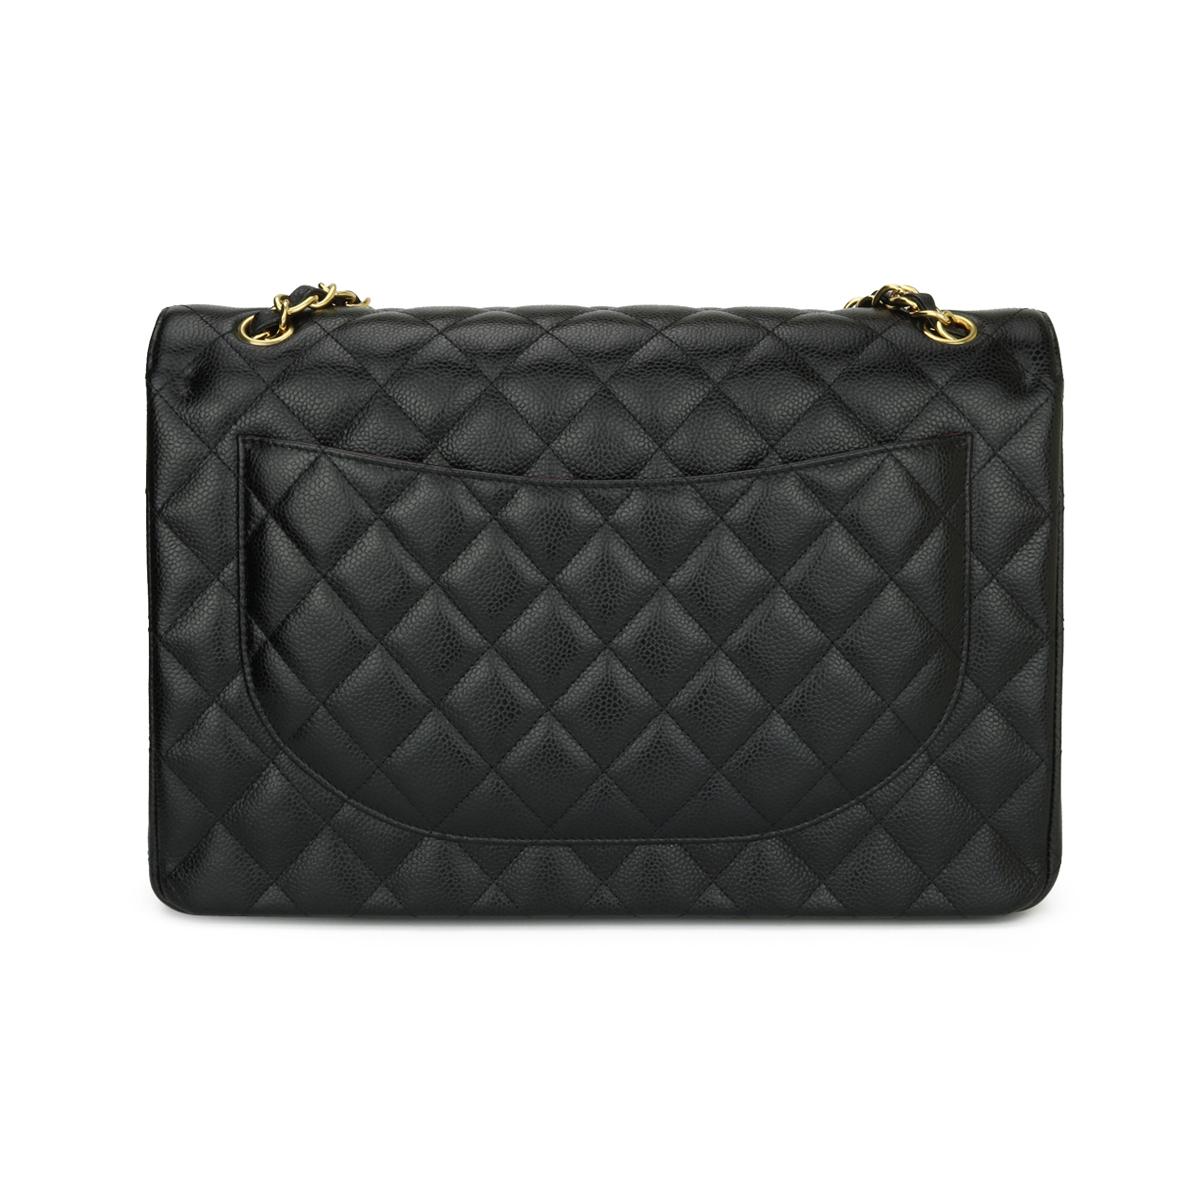 chanel maxi flap bag in black caviar with gold hardware